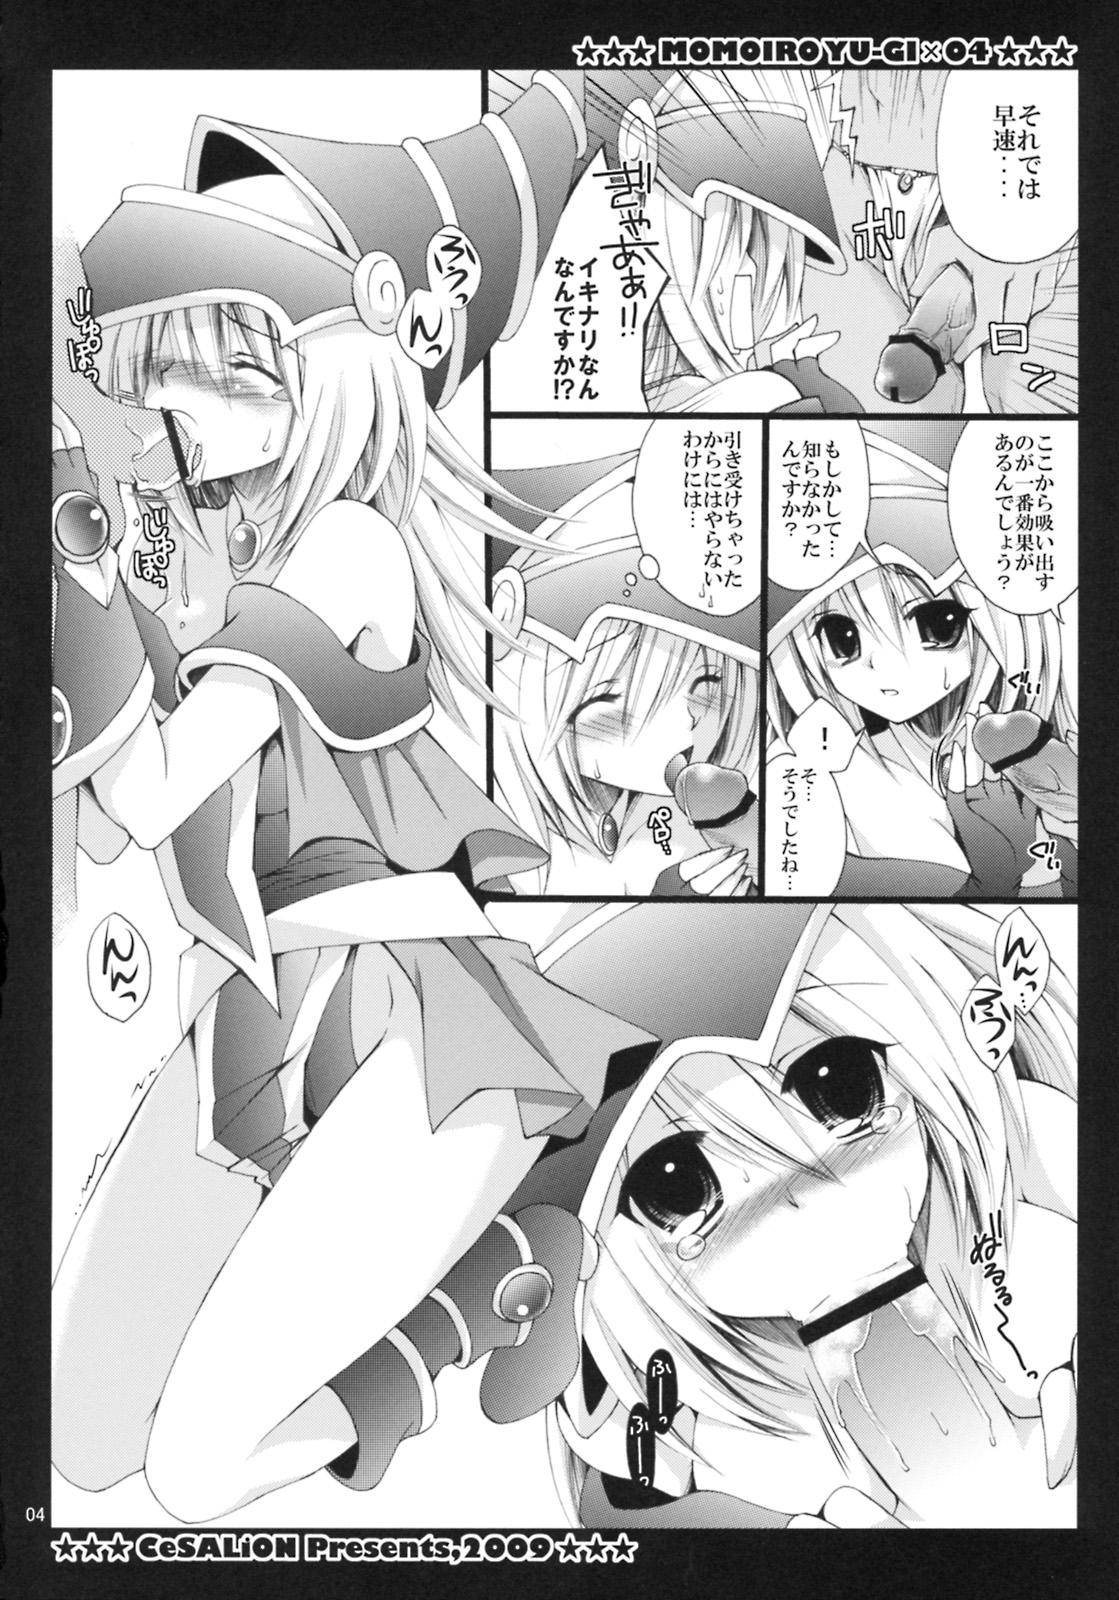 Delicia MAGICAL PARADISE - Yu-gi-oh zexal Yu-gi-oh Shaven - Page 3